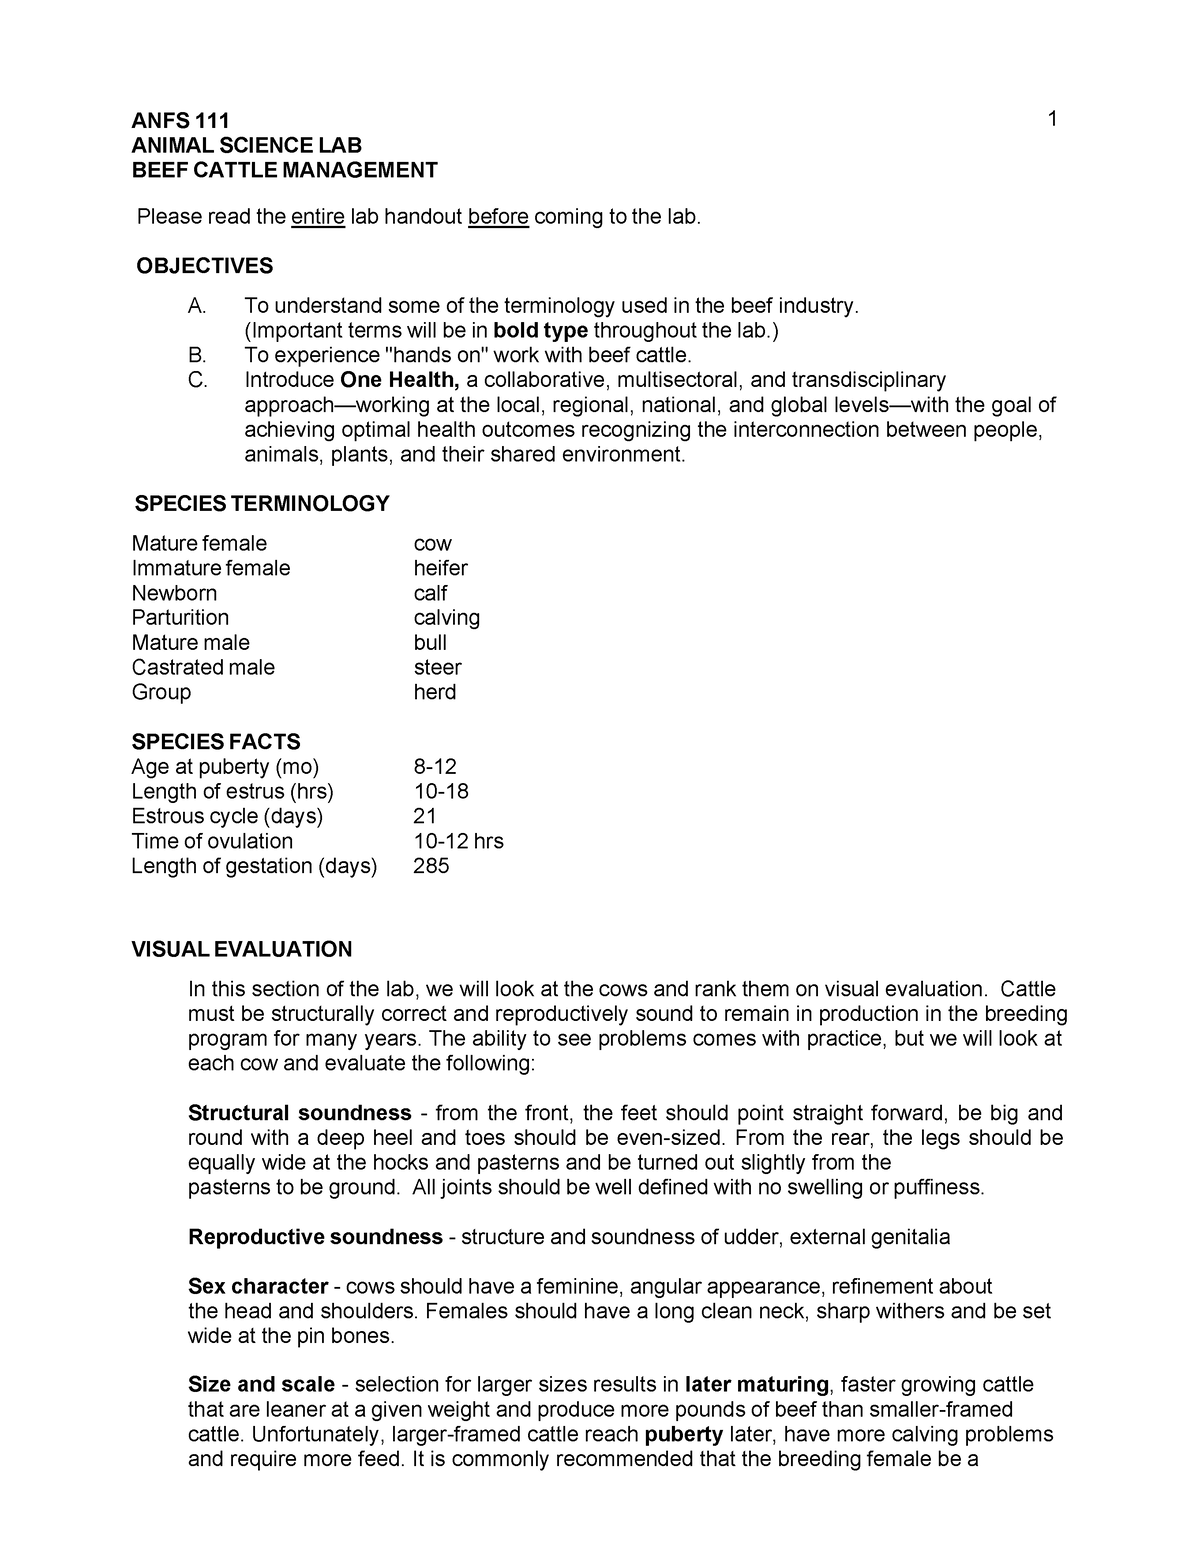 Beef Cattle Lab Handout - ANFS 111 1 ANIMAL SCIENCE LAB BEEF CATTLE ...